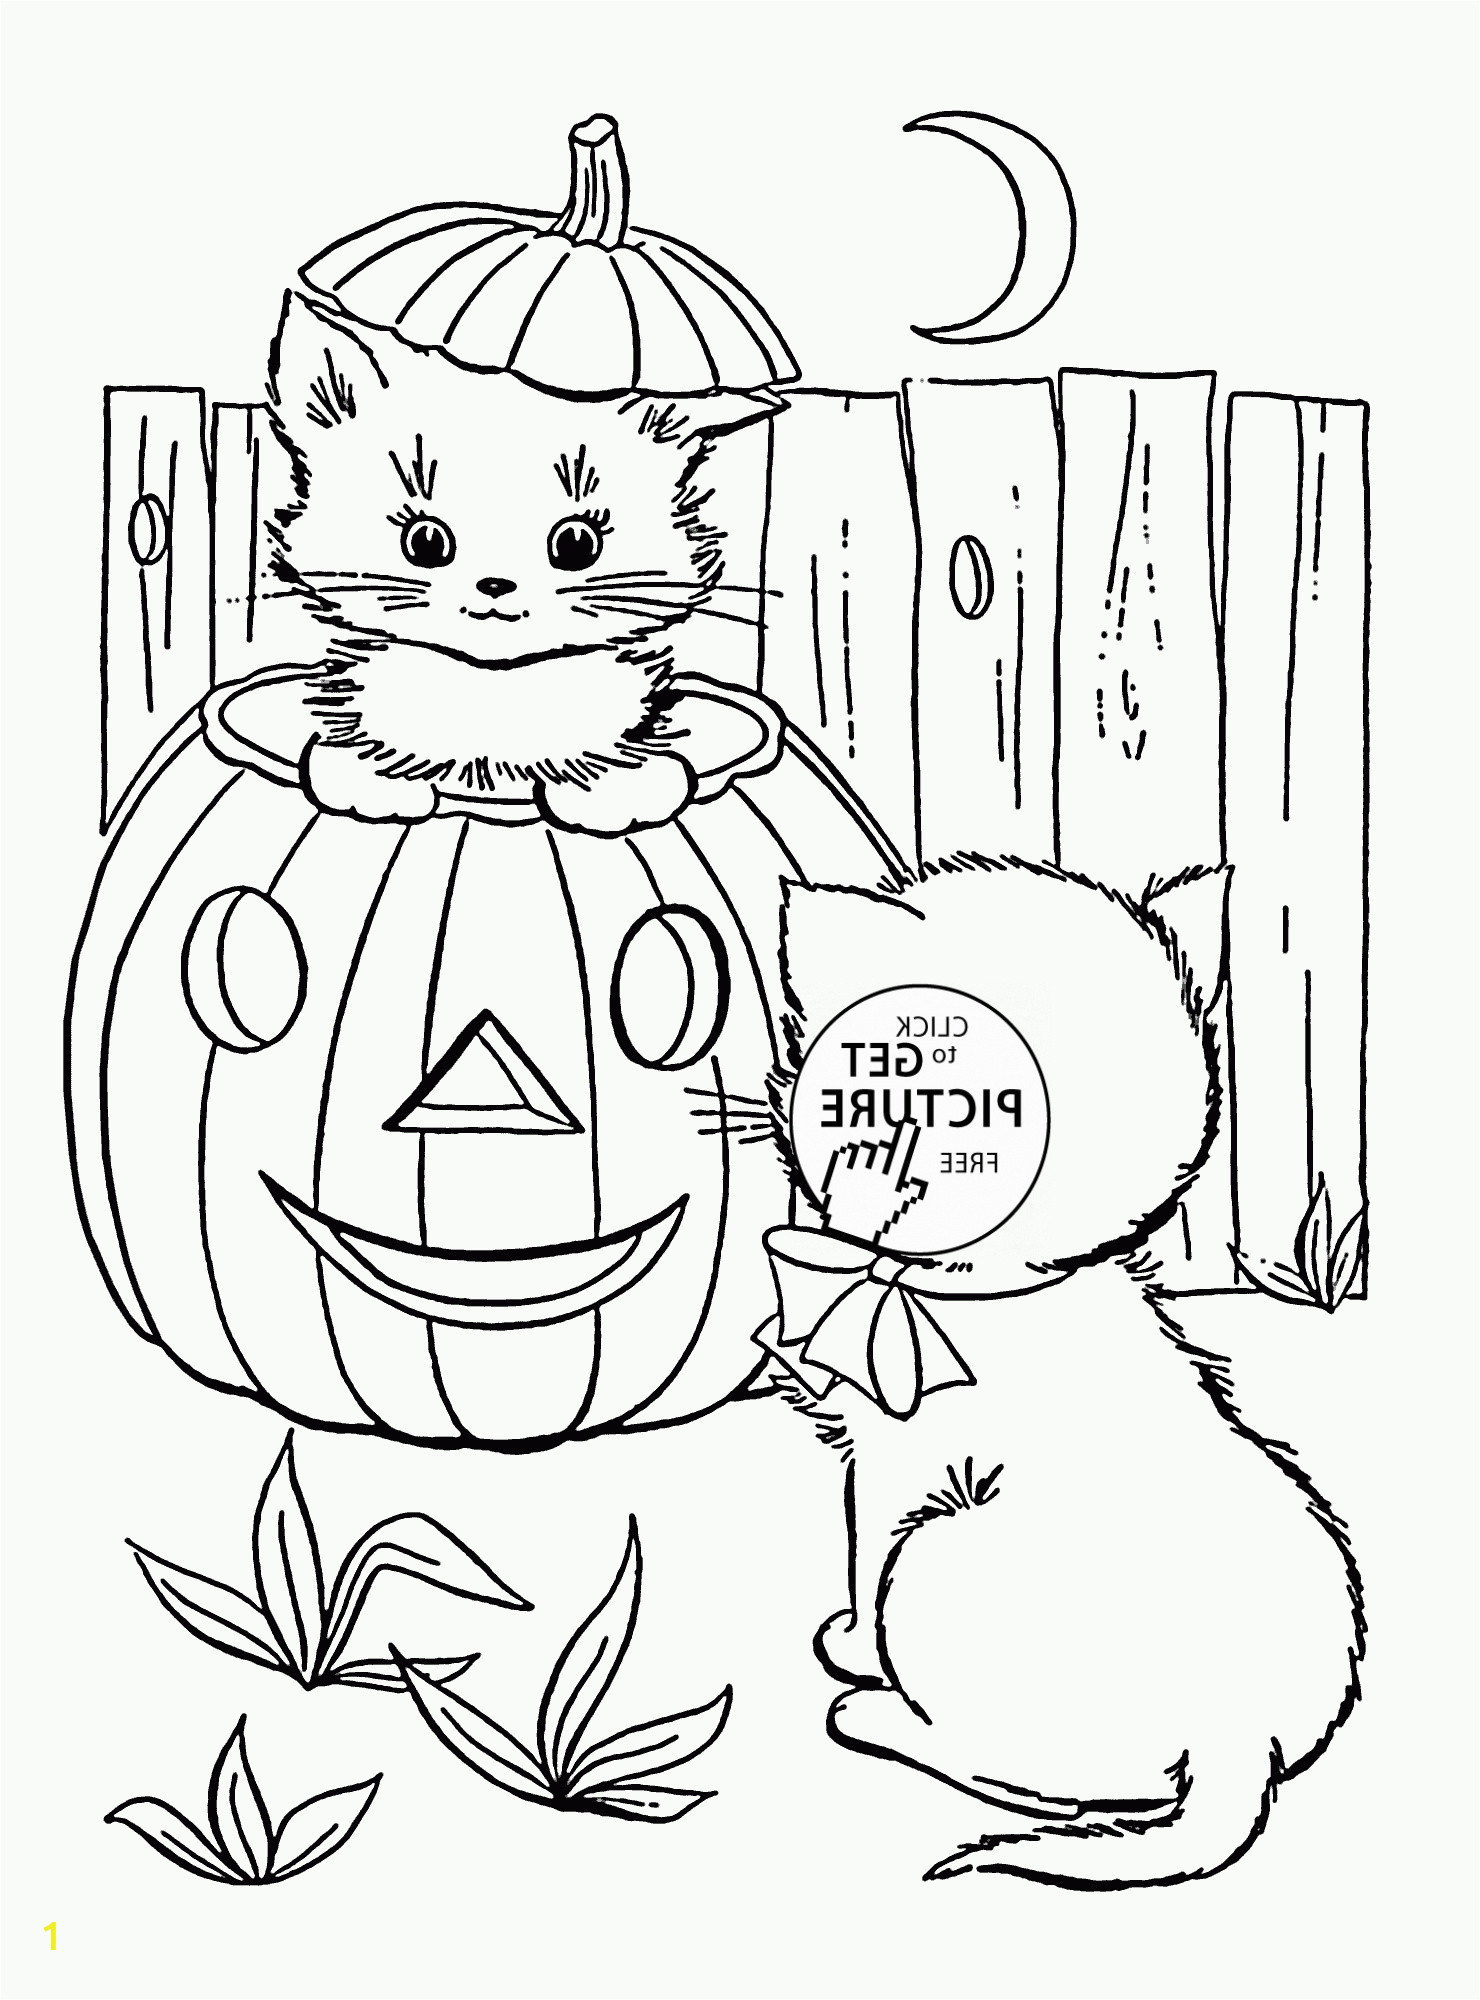 printable halloween coloring page beautiful photography halloween coloring pages printable disney halloween cat coloring of printable halloween coloring page